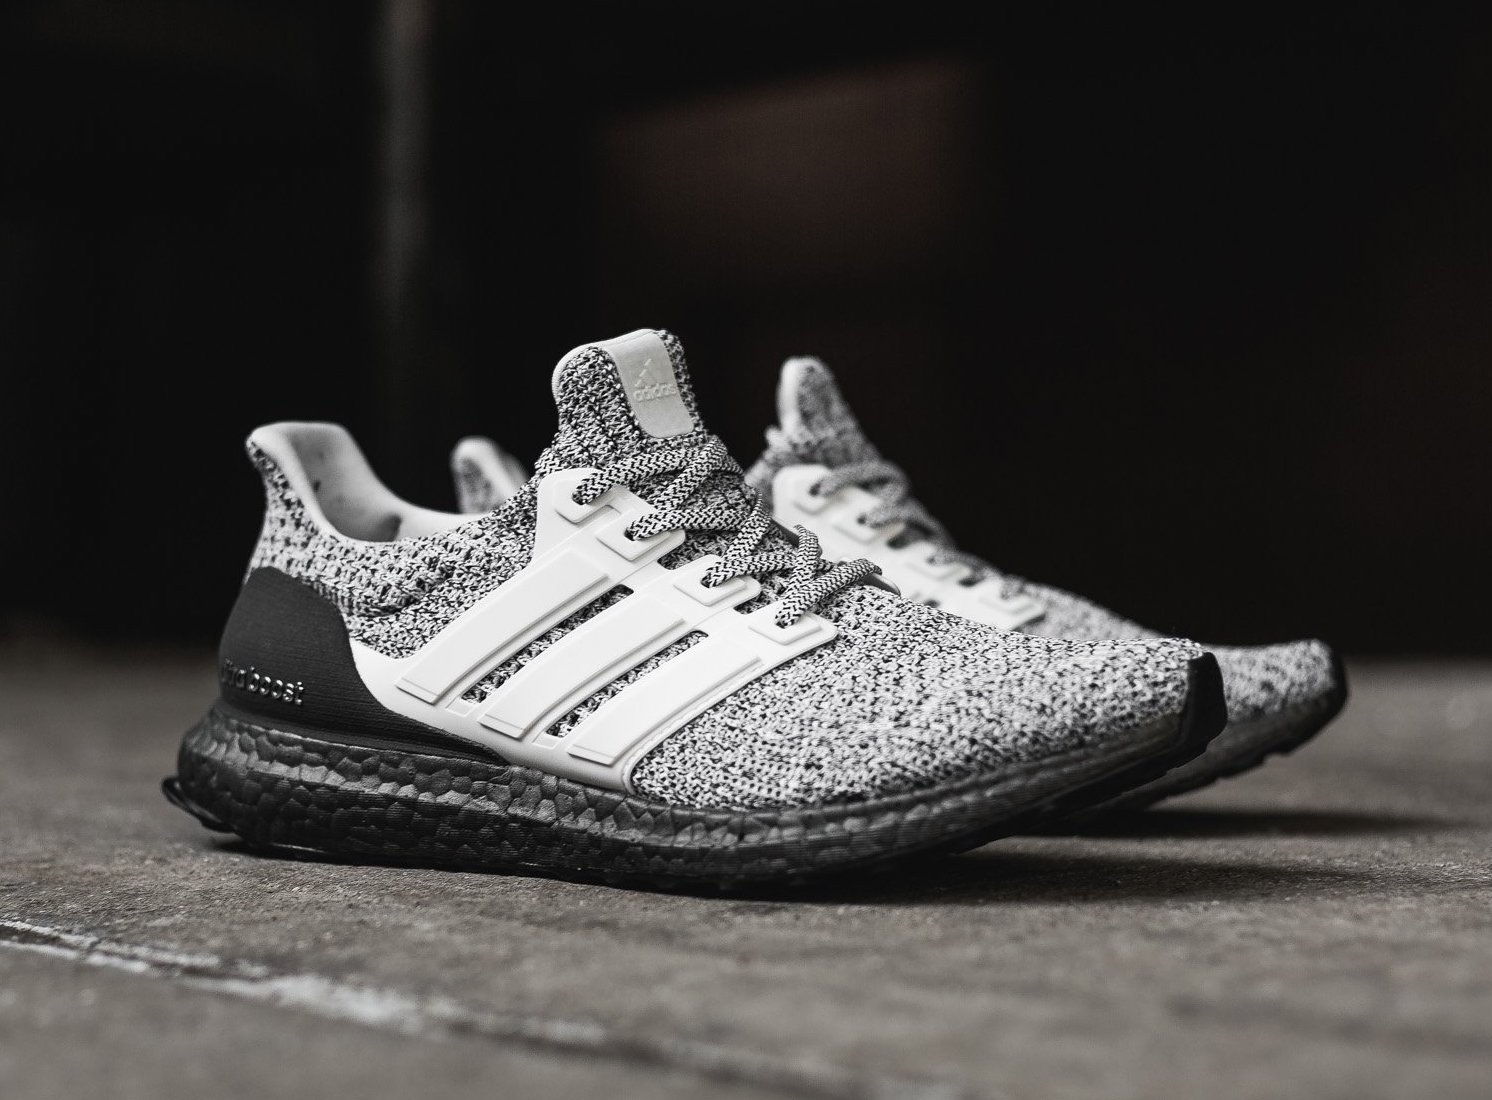 adidas cookies and cream 4.0